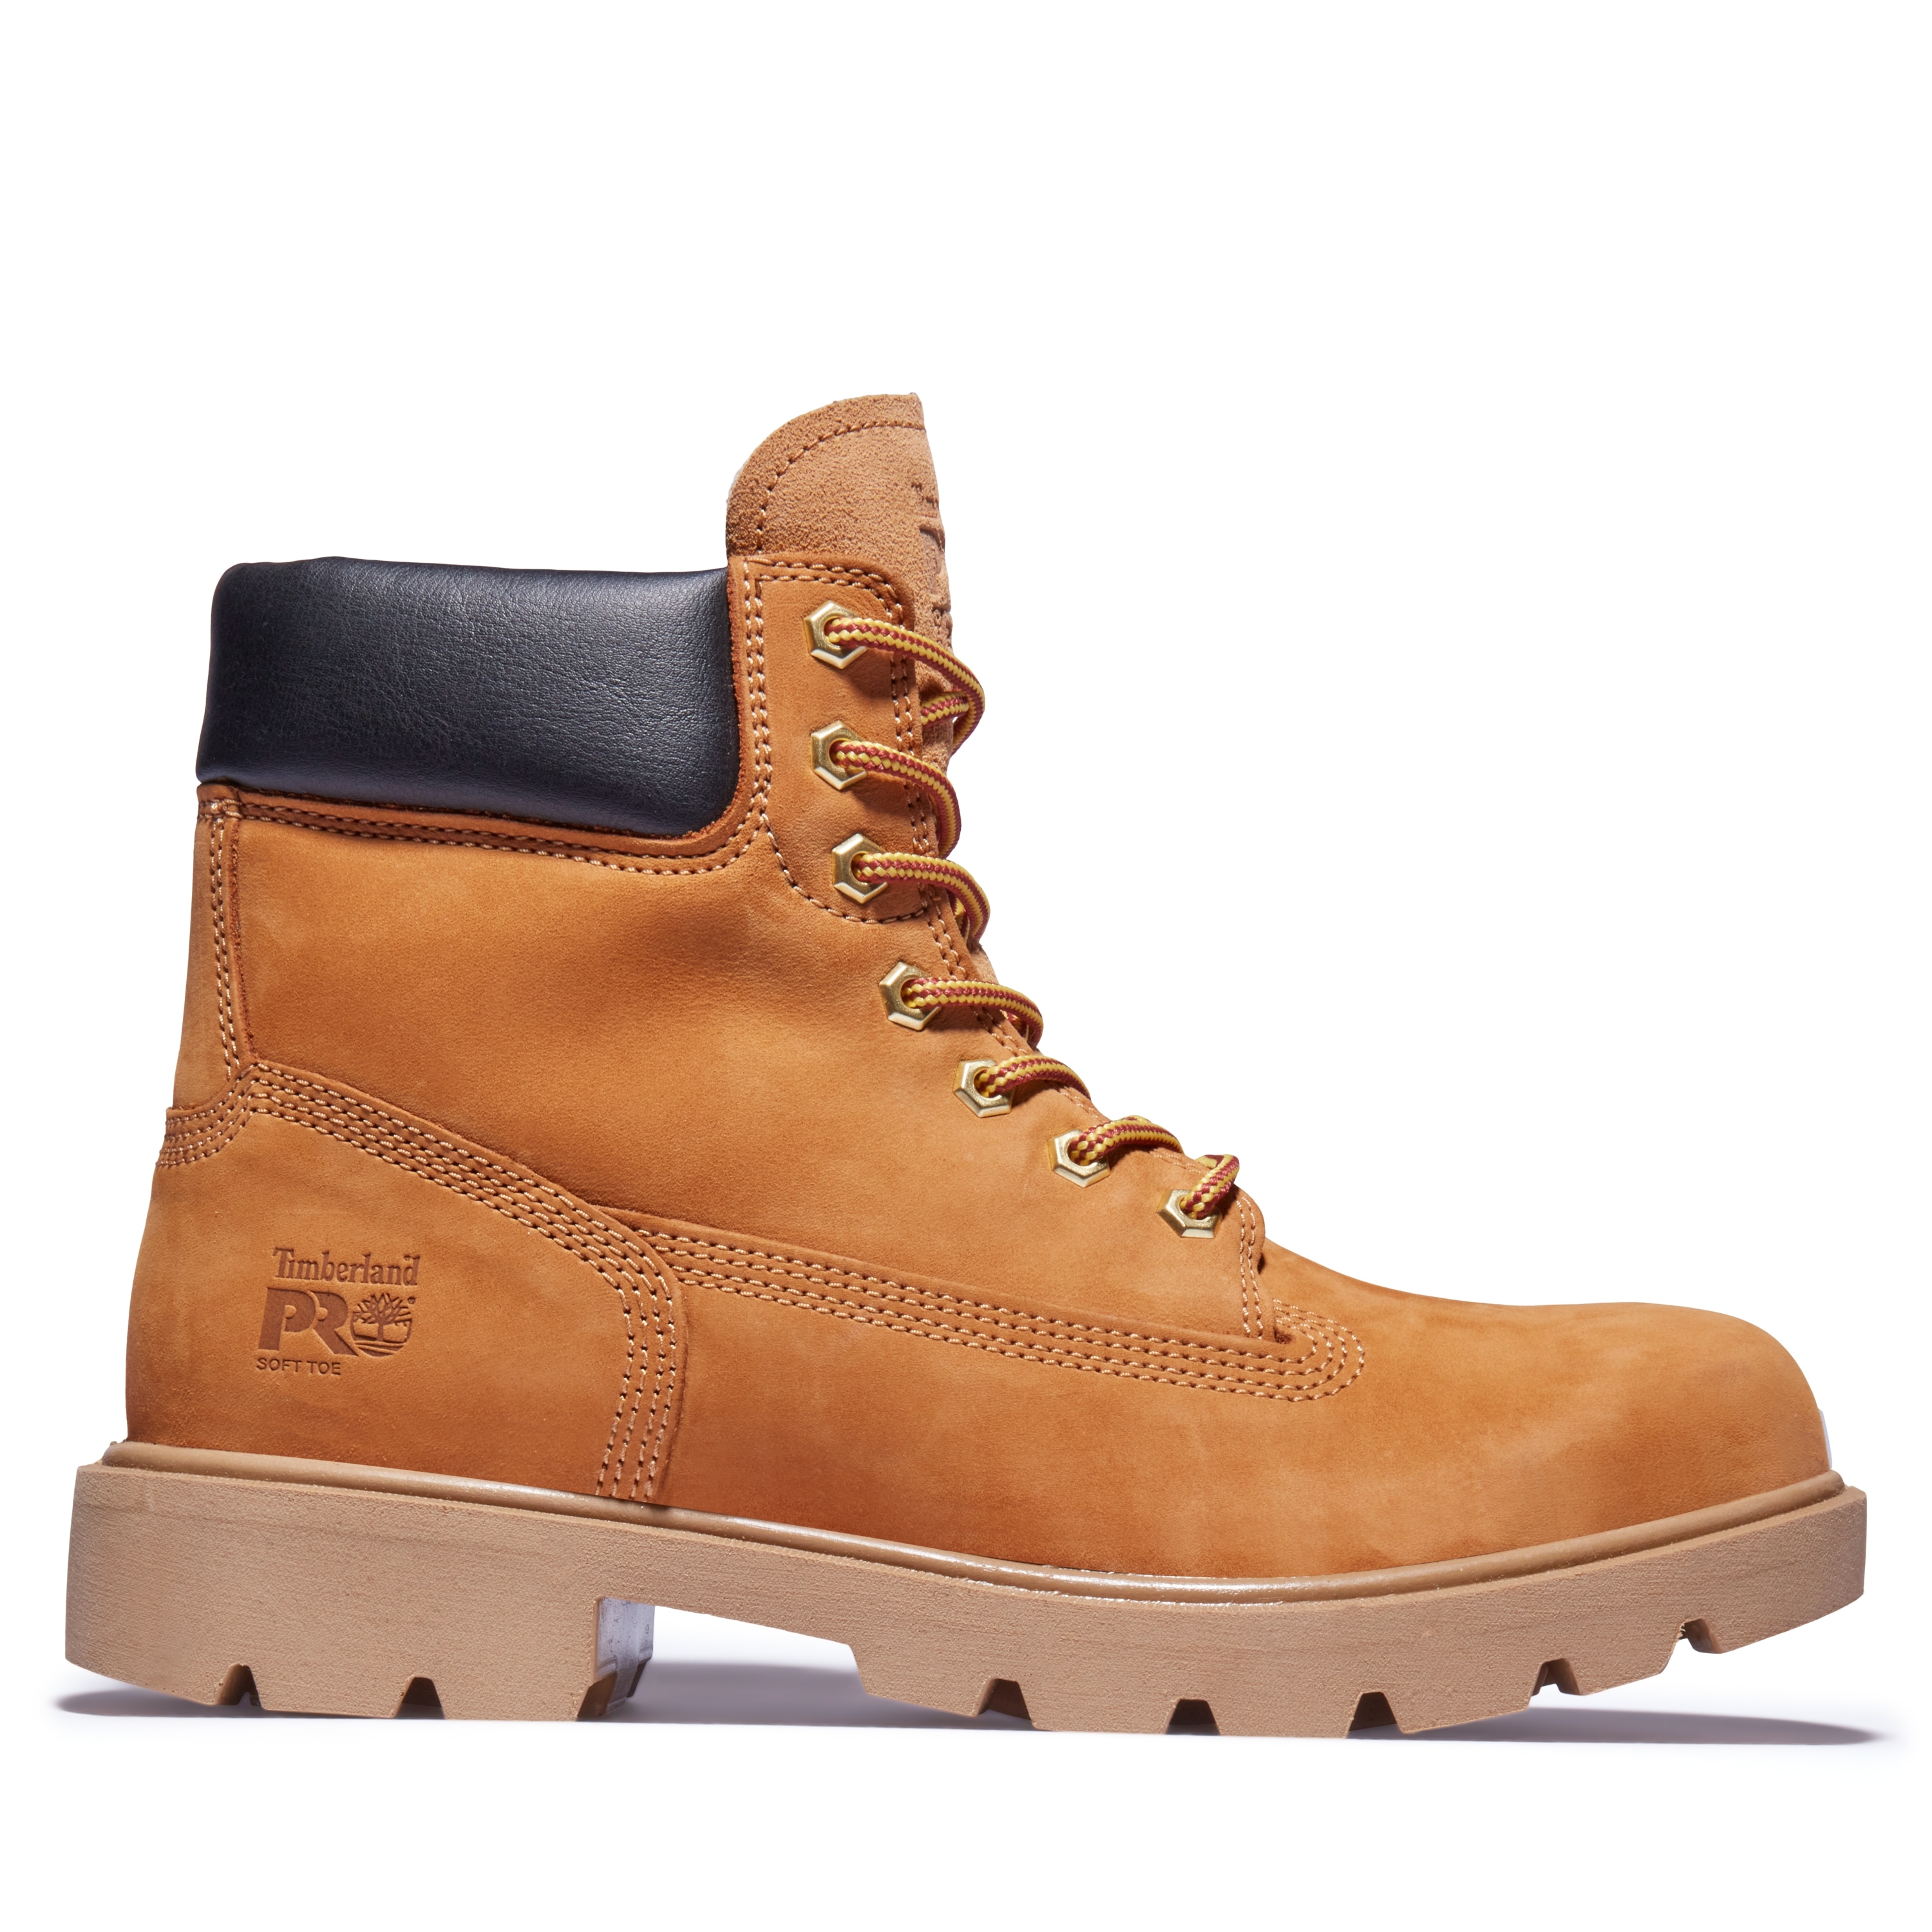 Cyberruimte nationalisme geschenk Timberland PRO Mens Wheat No (Not Recommended For Wet Areas) Work Boots  Size: 11 Medium in the Footwear department at Lowes.com